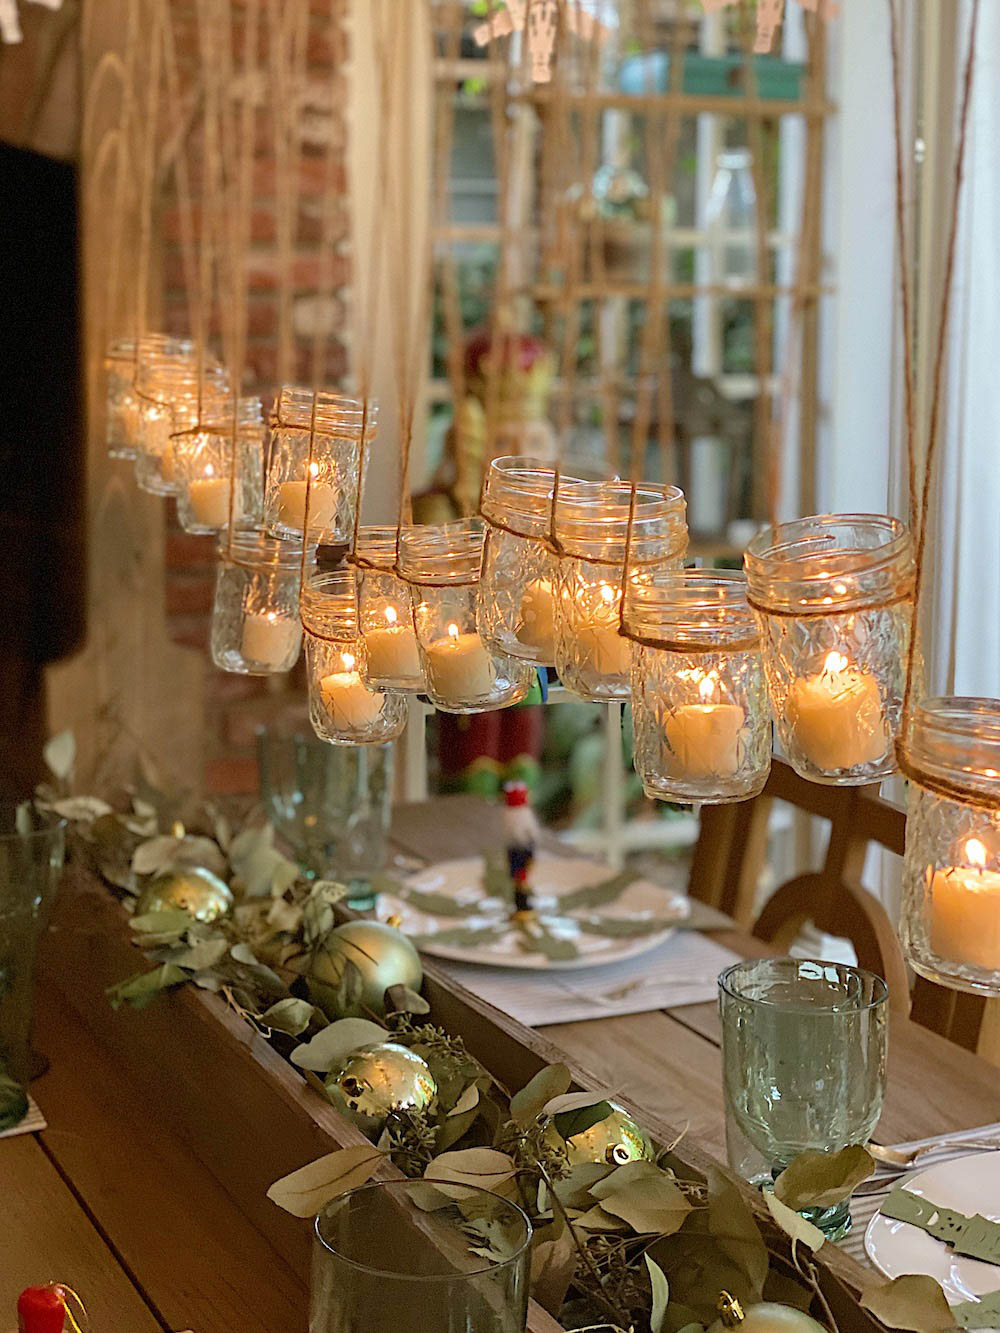 Table styled with hanging votive candles and ornaments